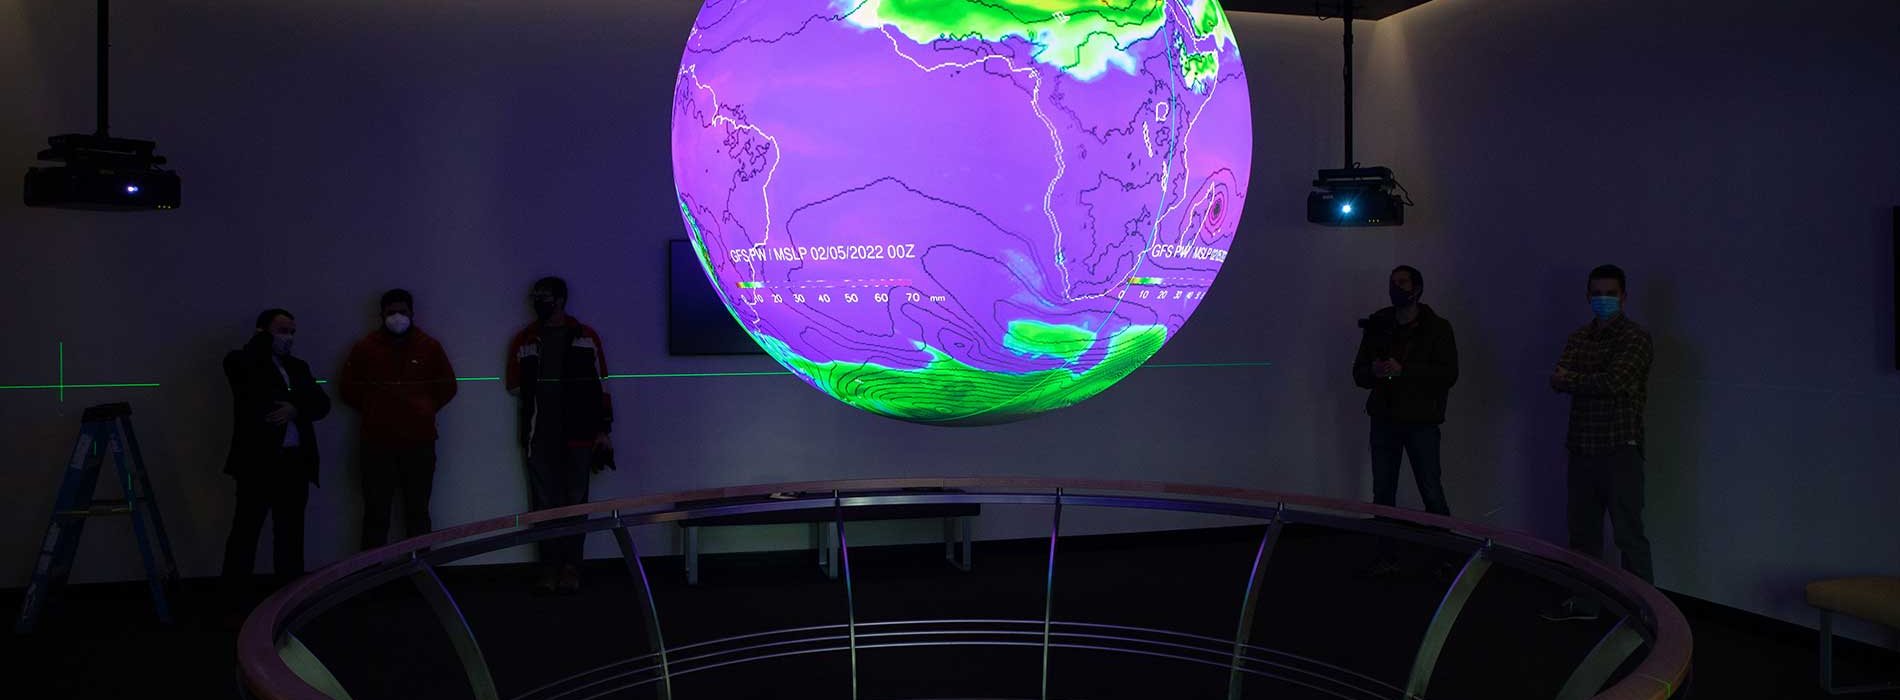 ETEC Map Room showing weather patterns on the globe